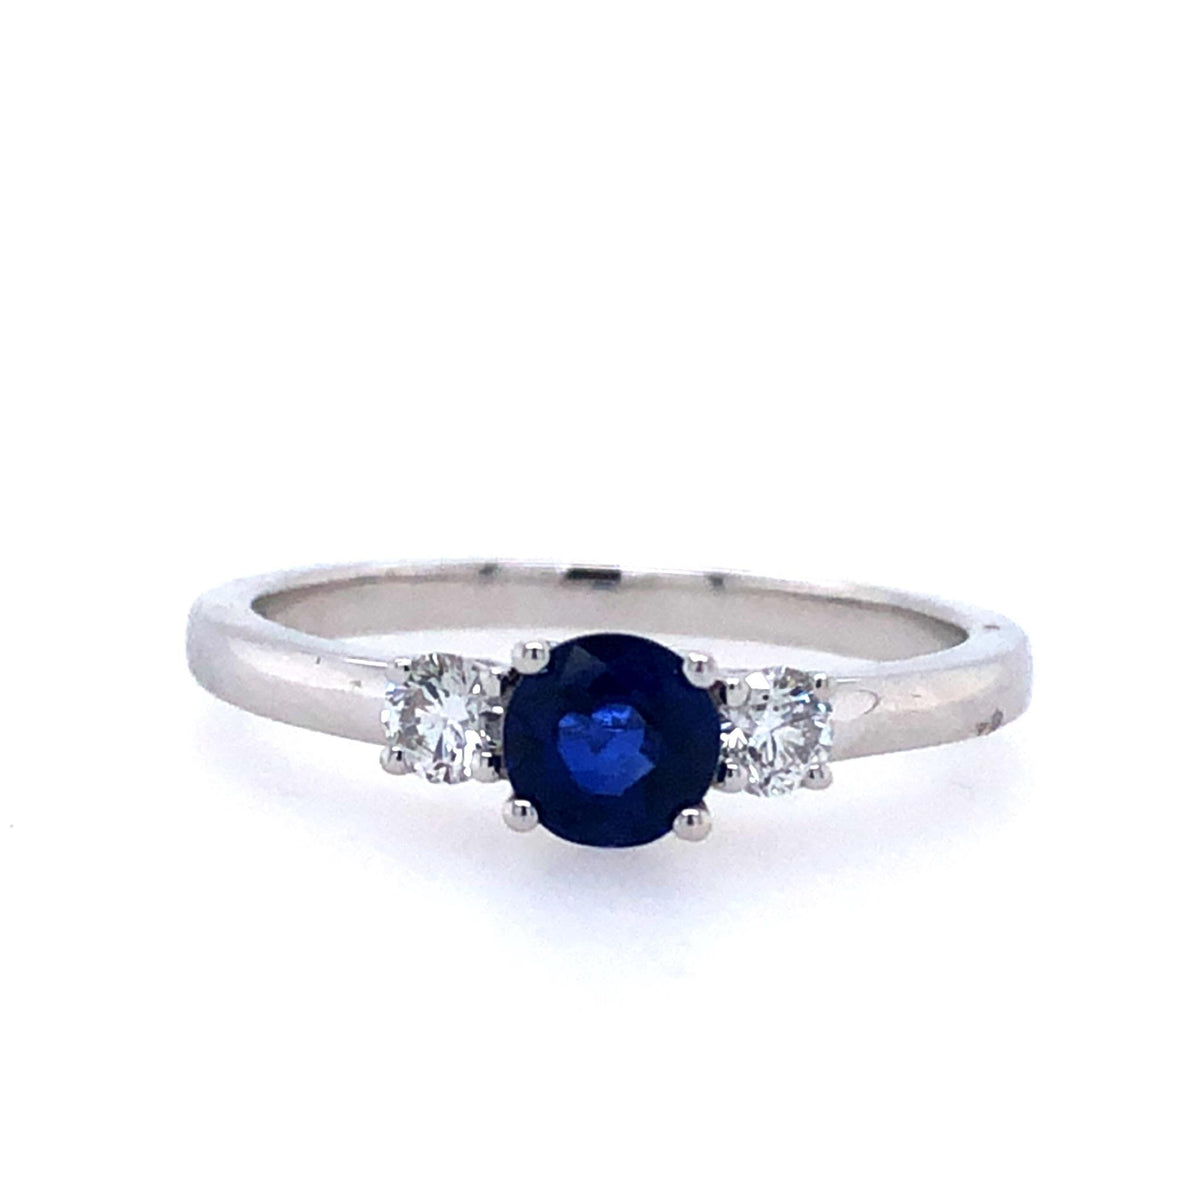 14Kt White Gold 3 Stone Gemstone Ring With 0.47ct Sapphire